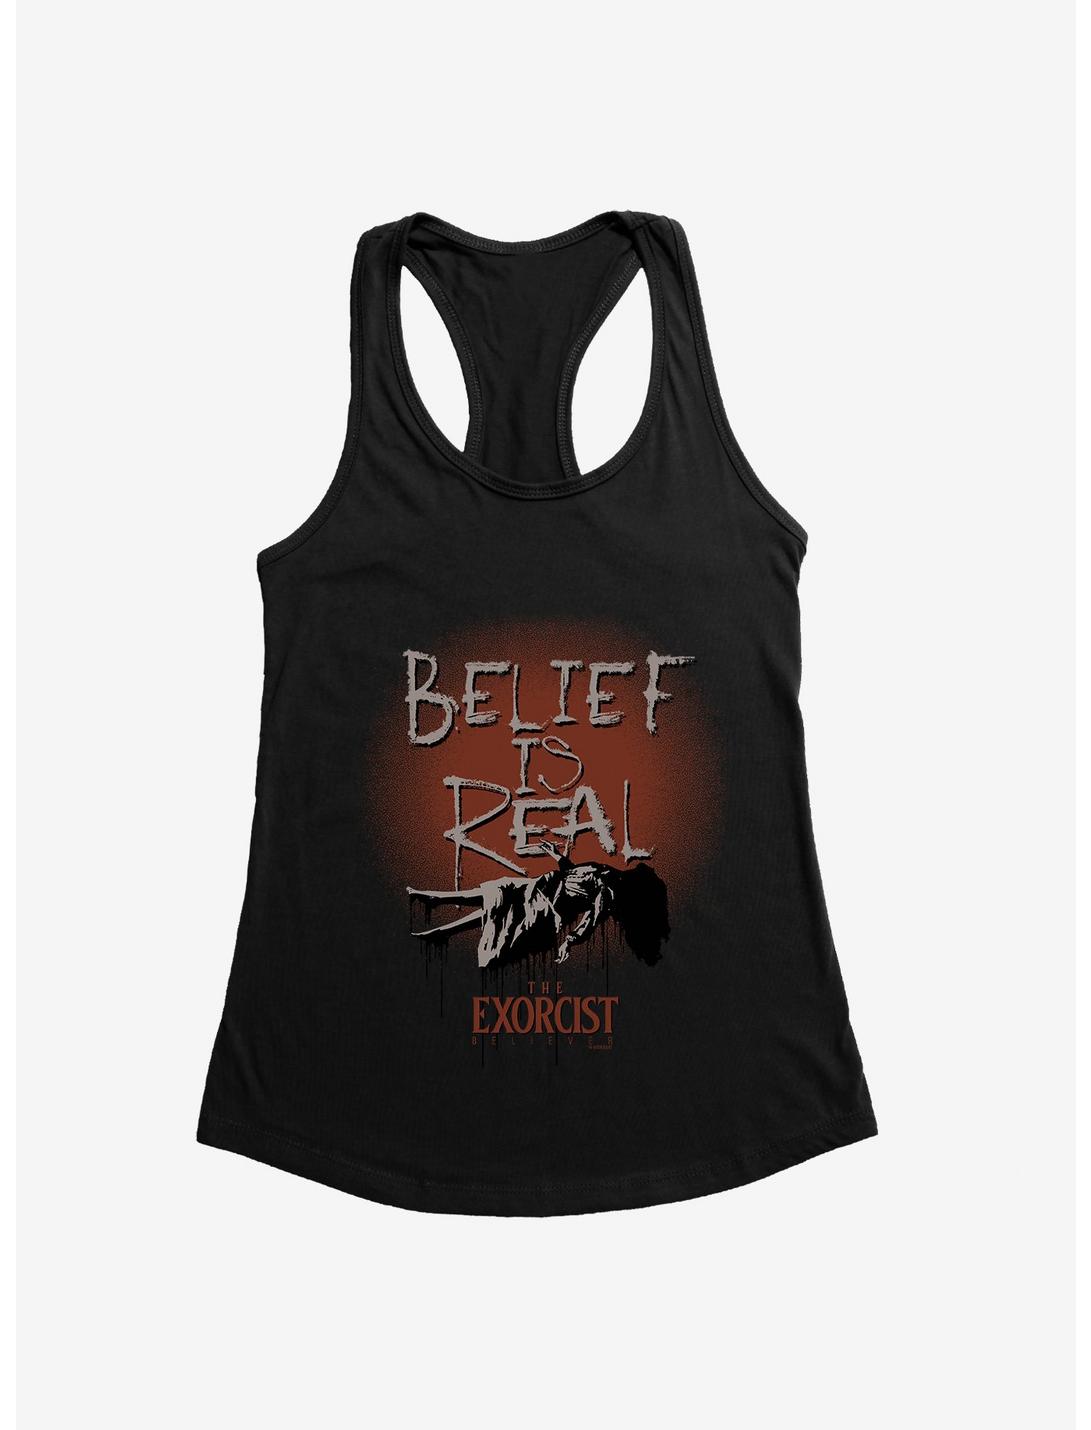 The Exorcist Believer Belief Is Real Girls Tank, BLACK, hi-res